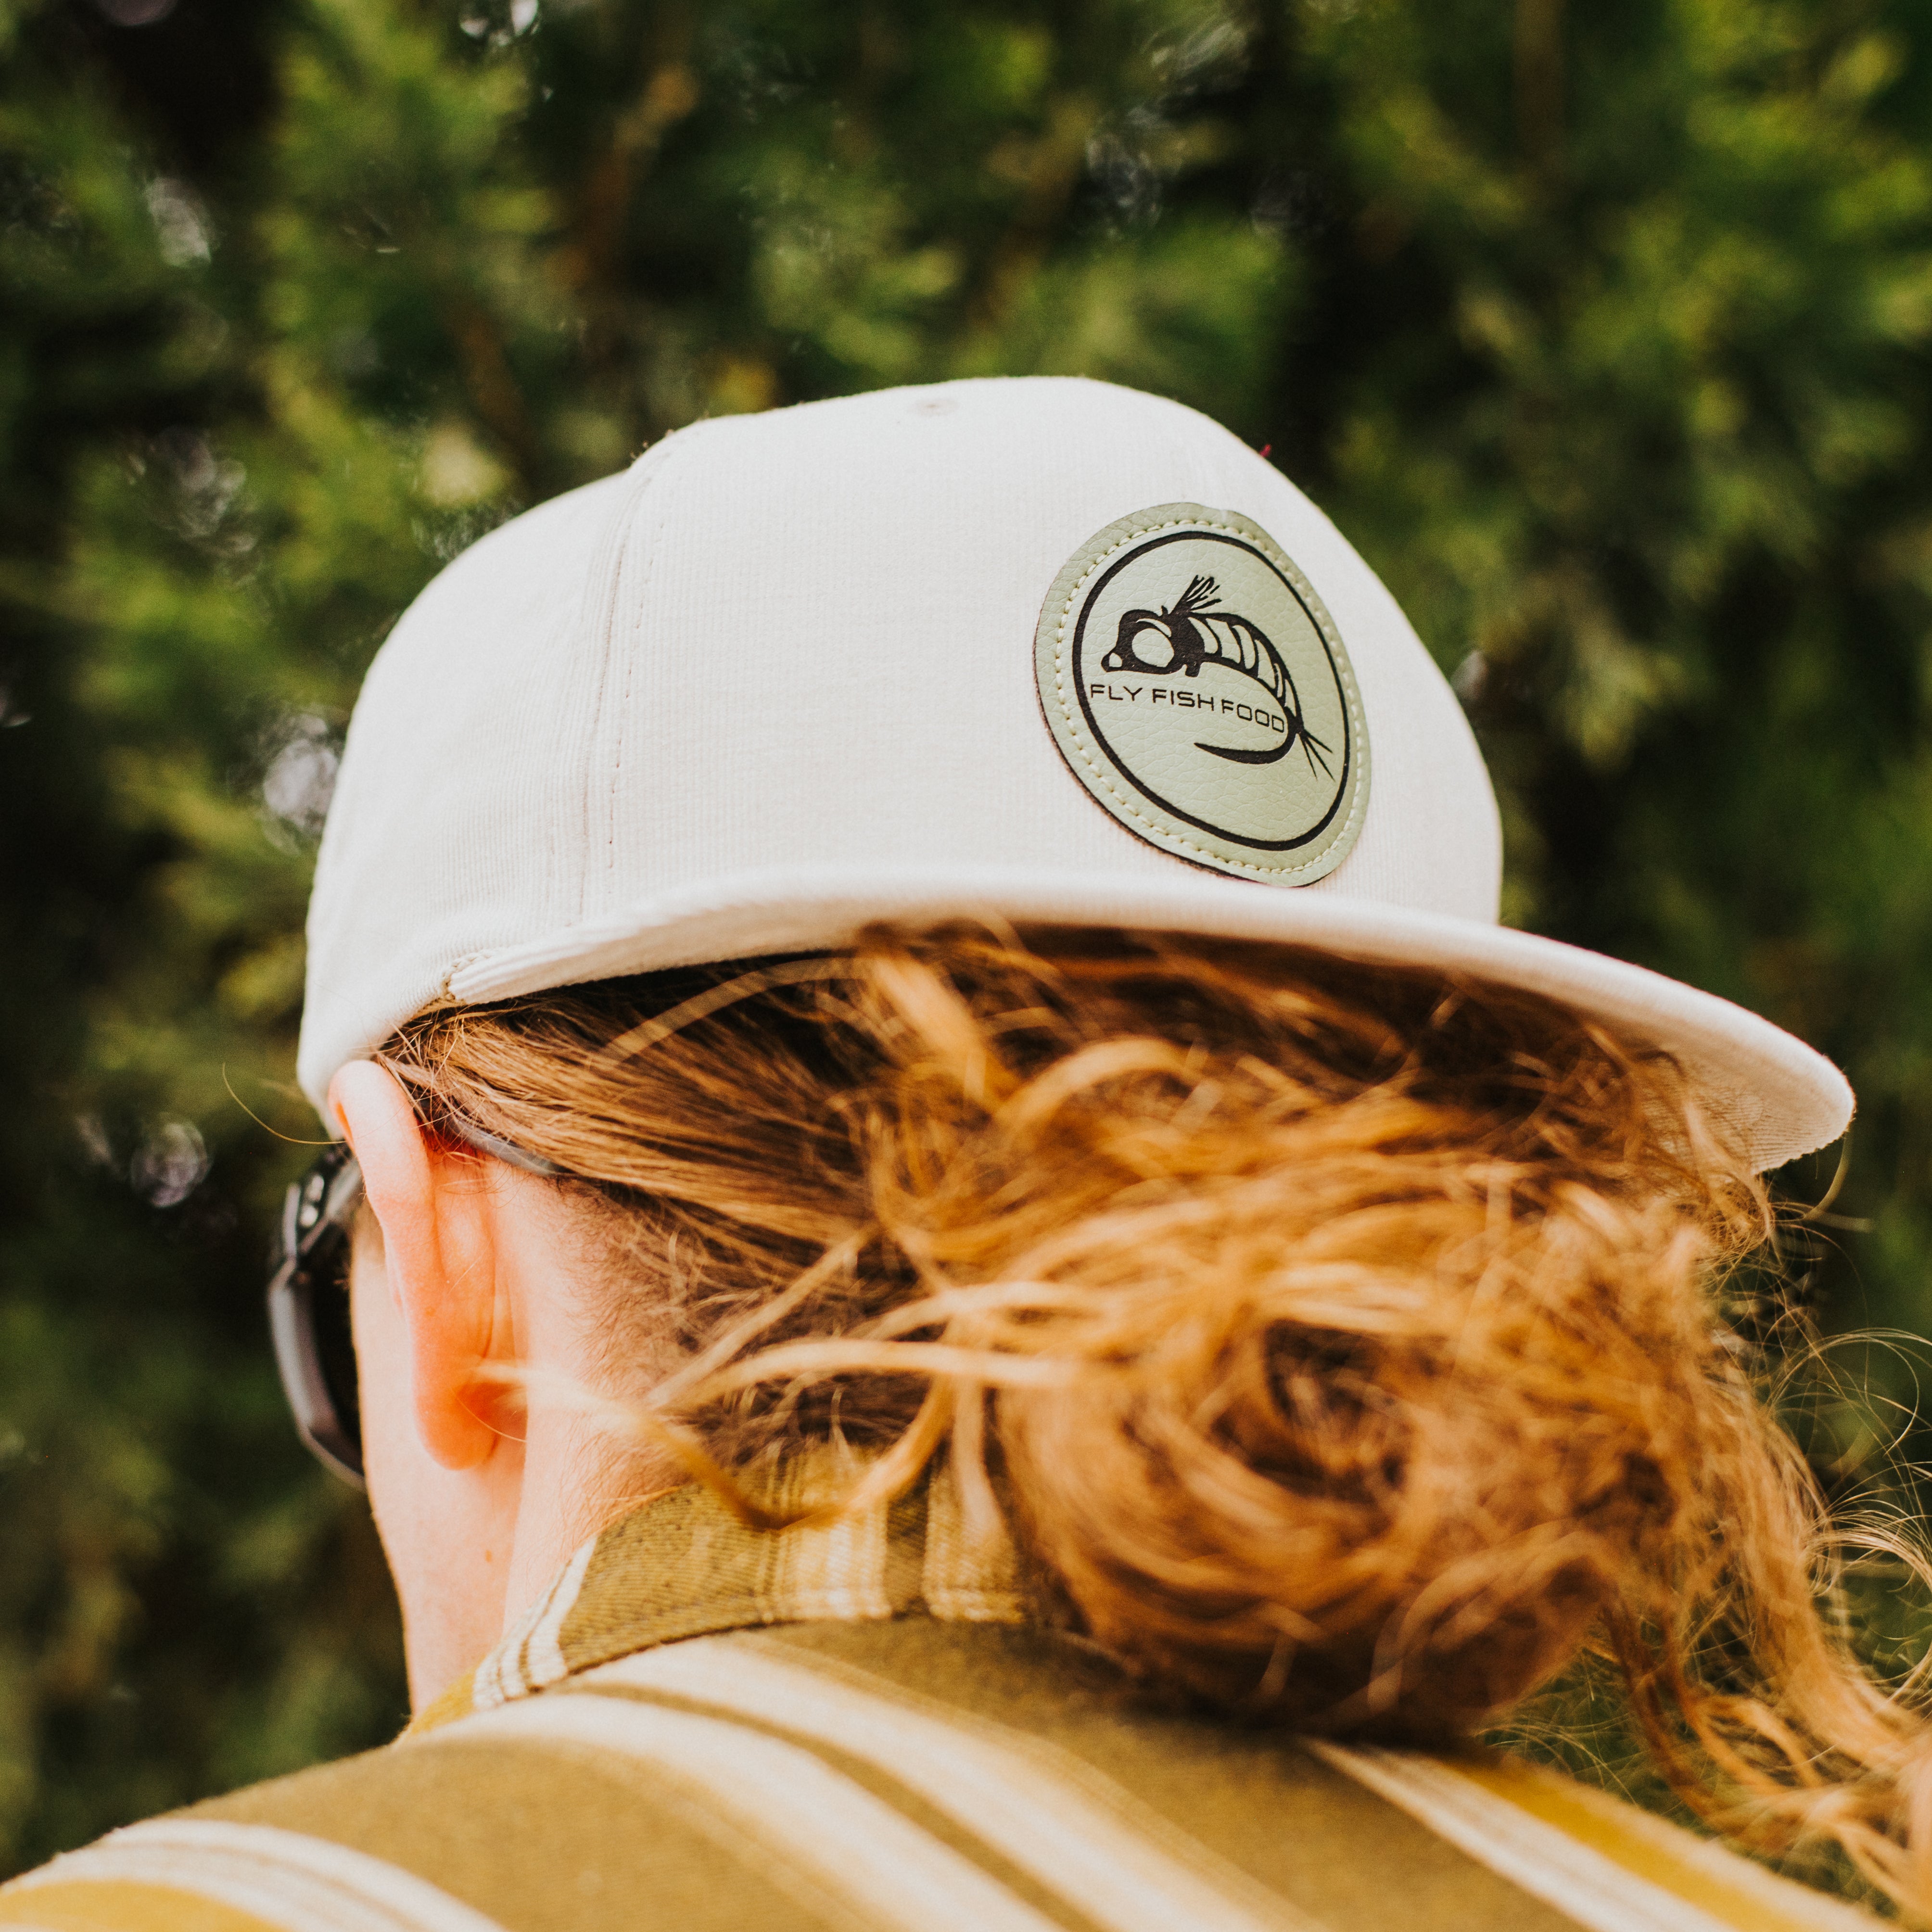 Design a logo for a hat - fly fishing related